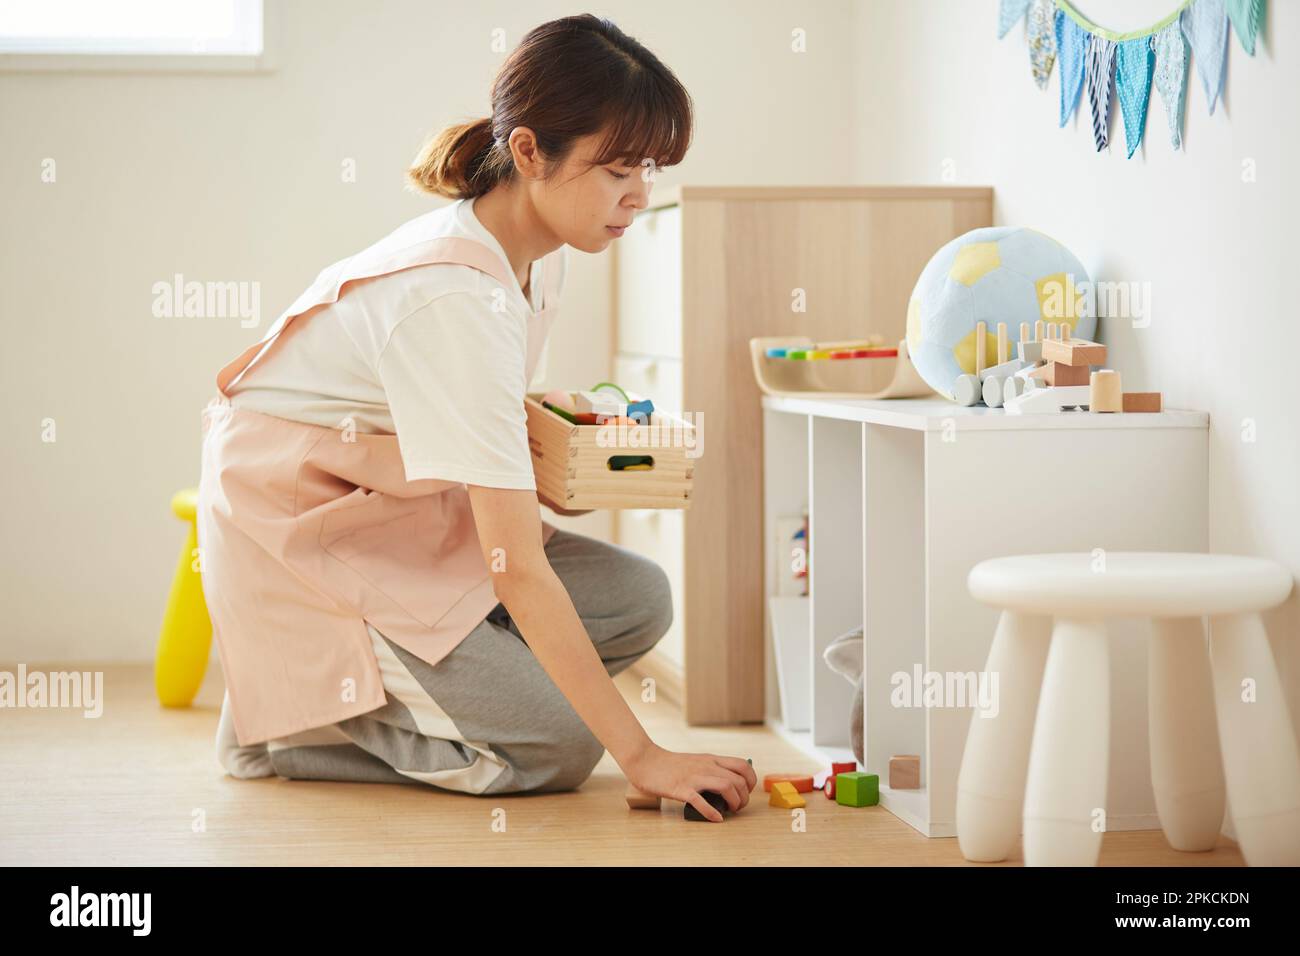 Daycare worker cleaning up afterwards Stock Photo